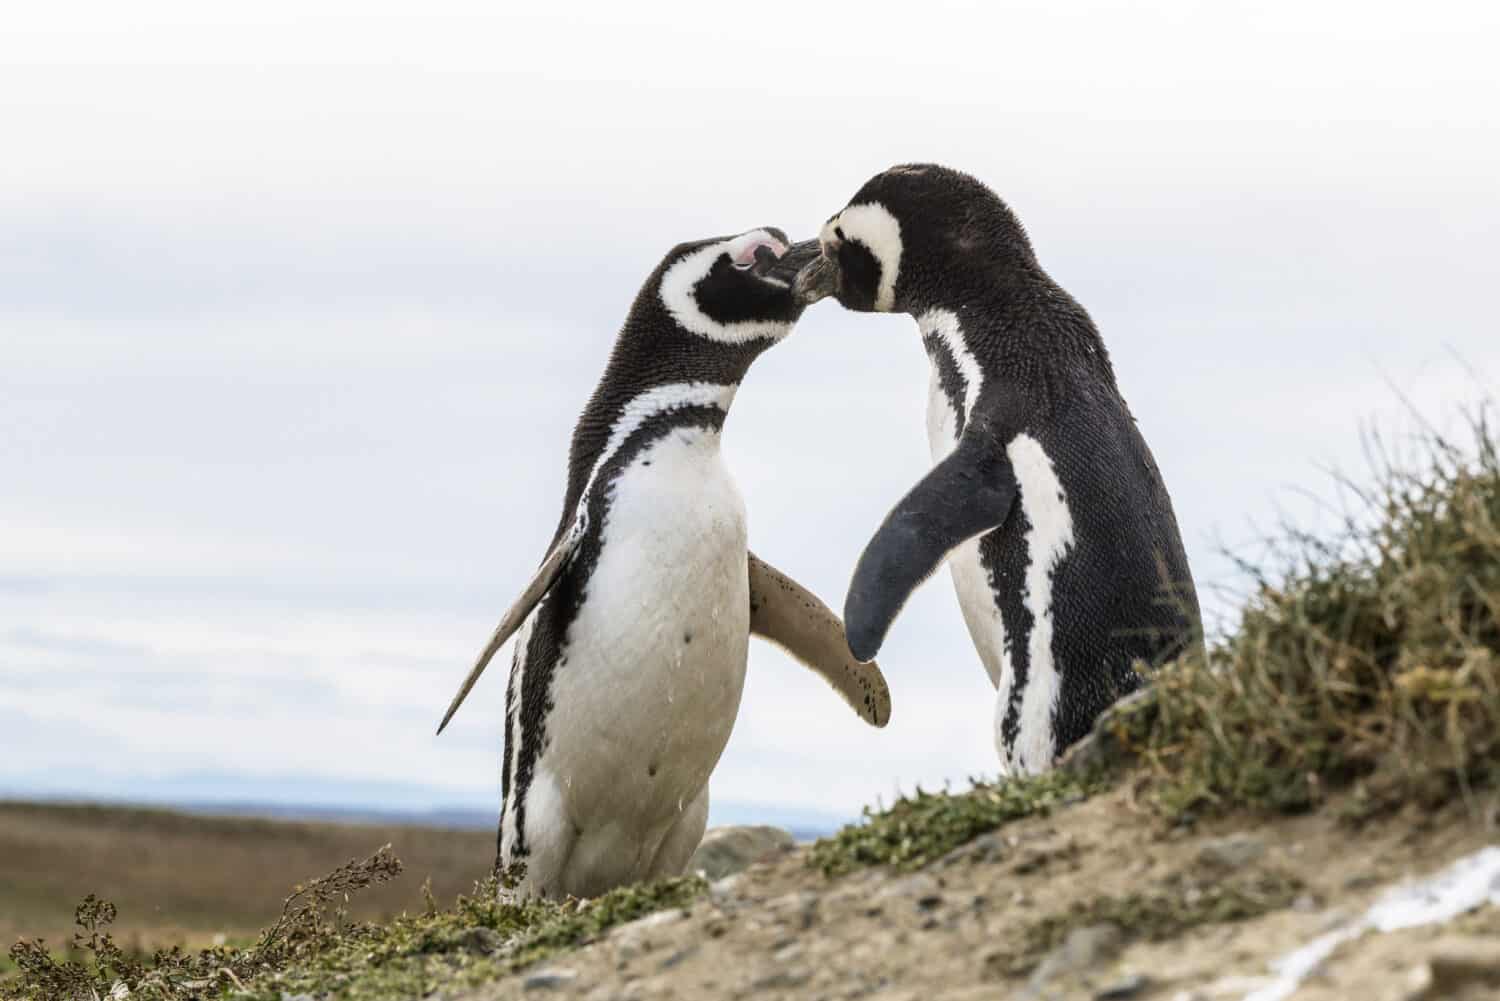 Kissing Magellanic penguins in Patagonia, Chile, South America